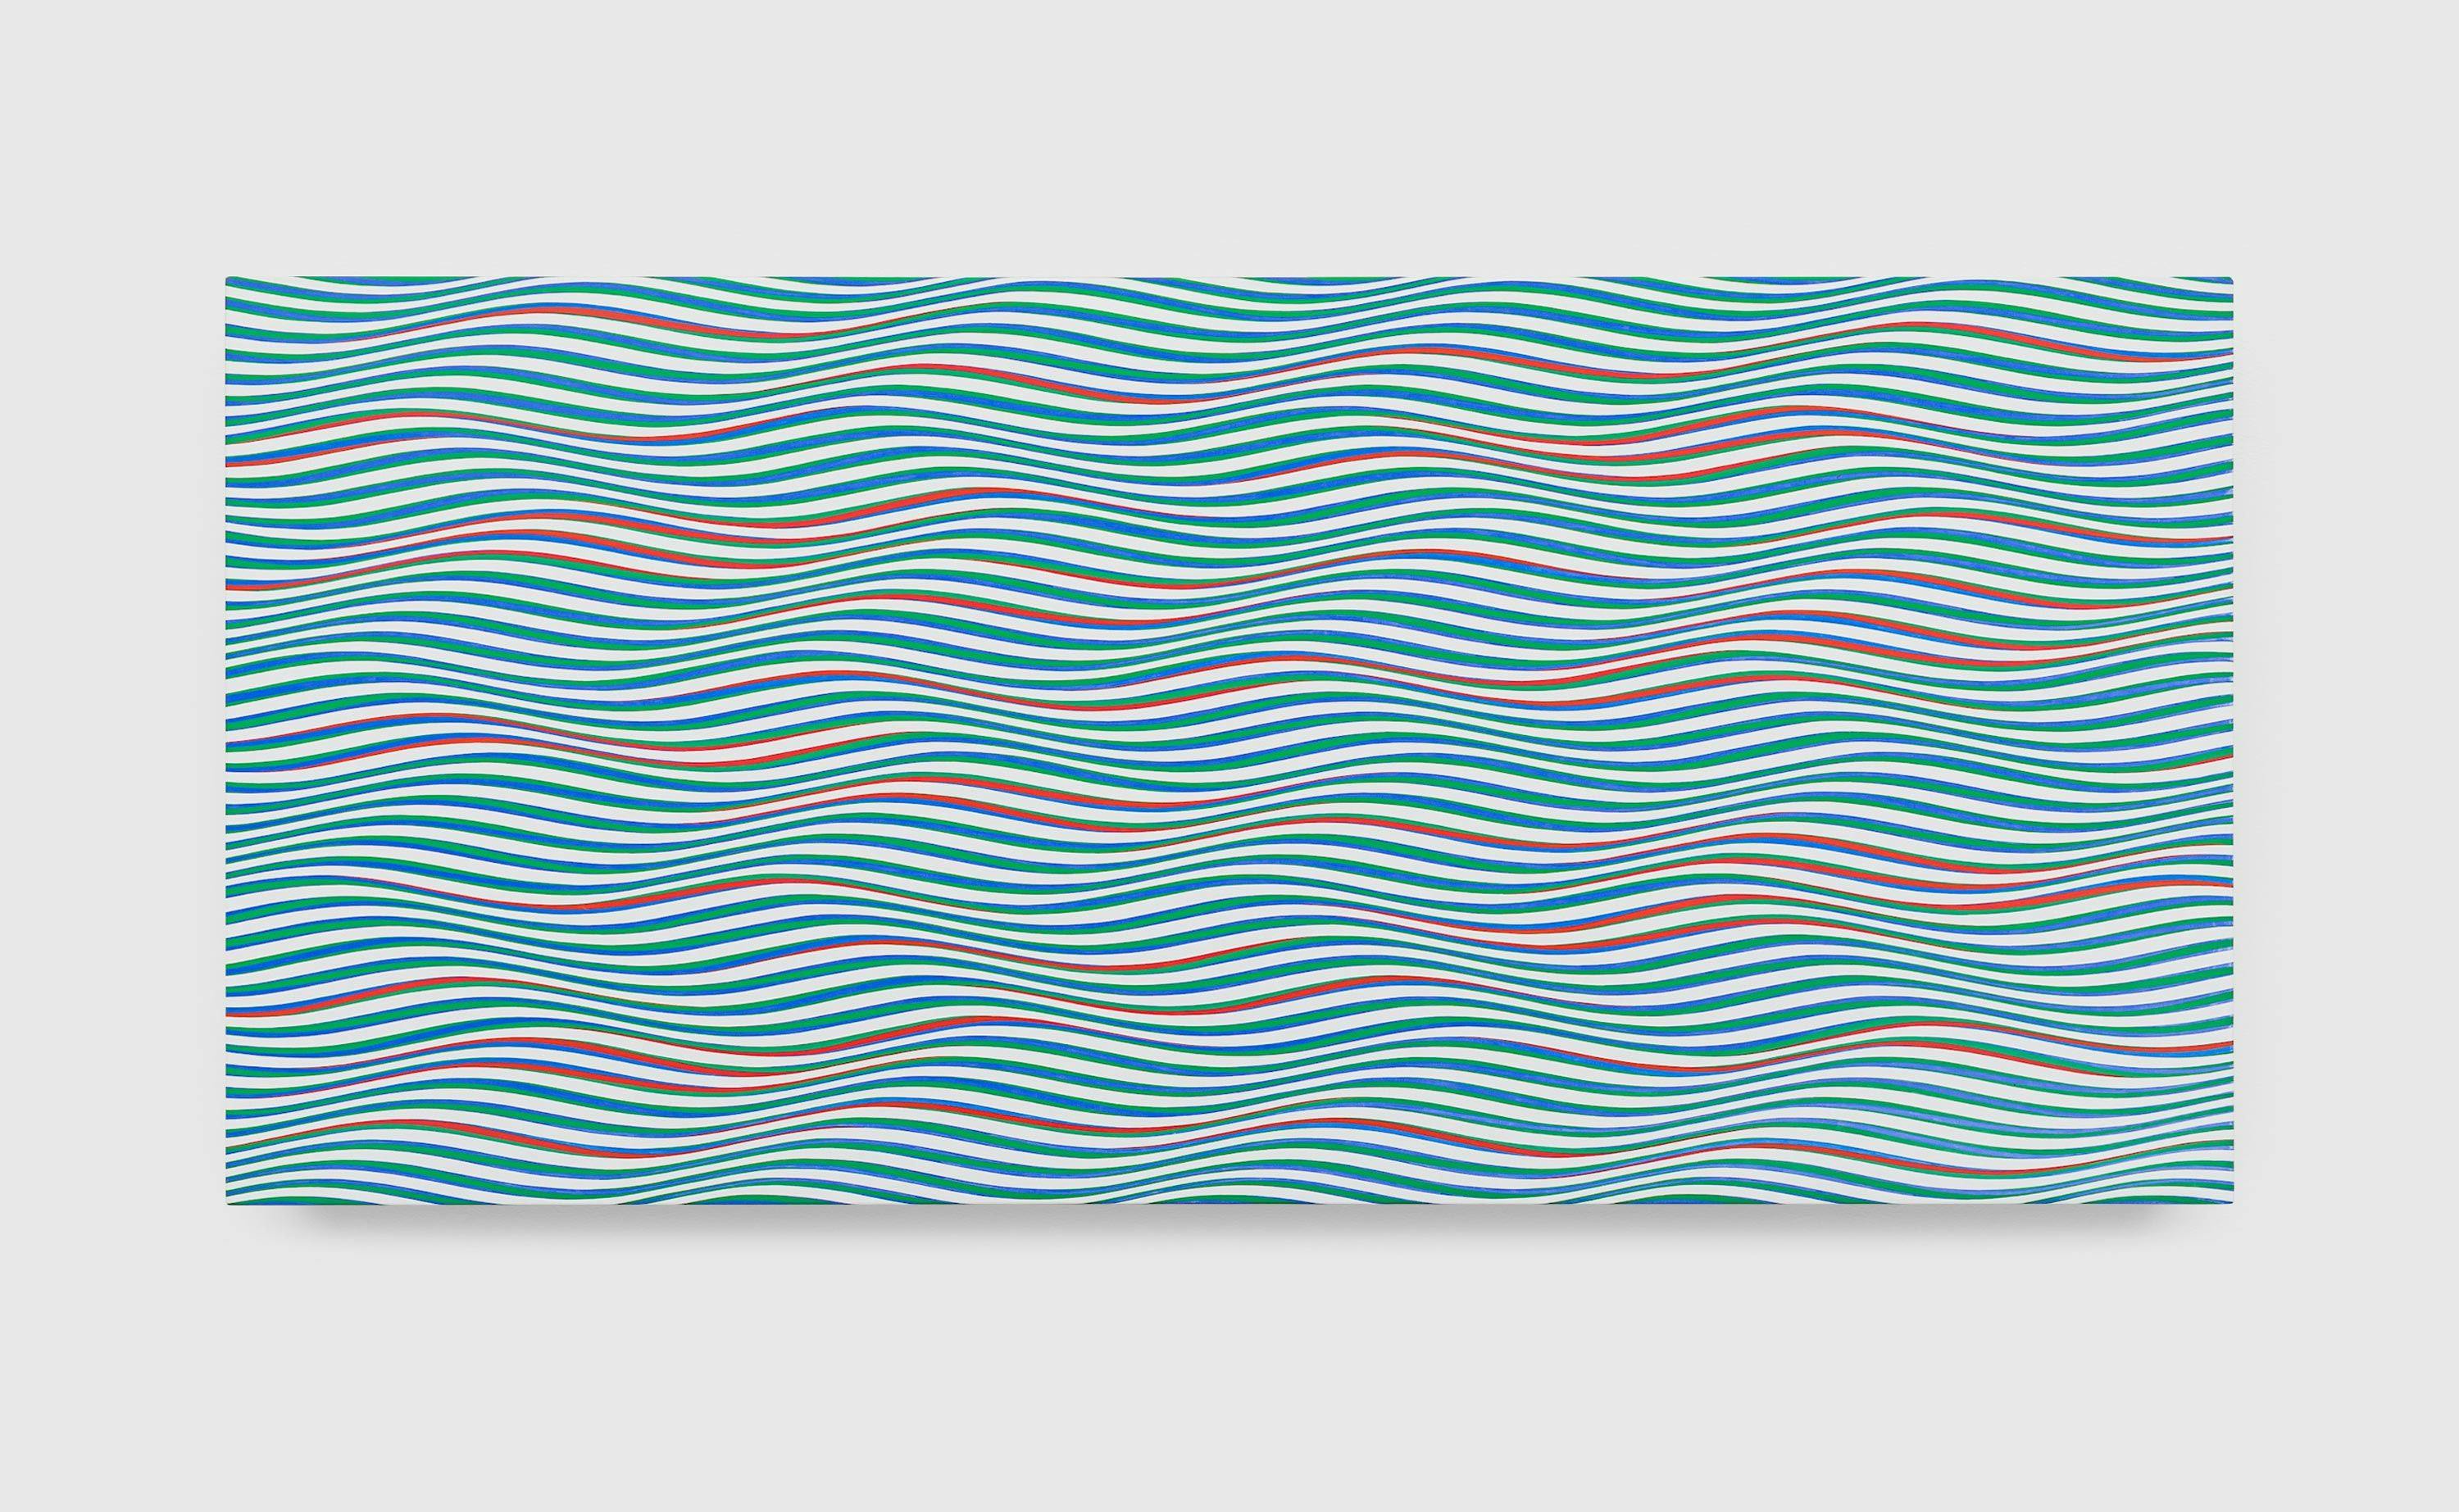 A painting by Bridget Riley, titled Streak III, dated 1980.